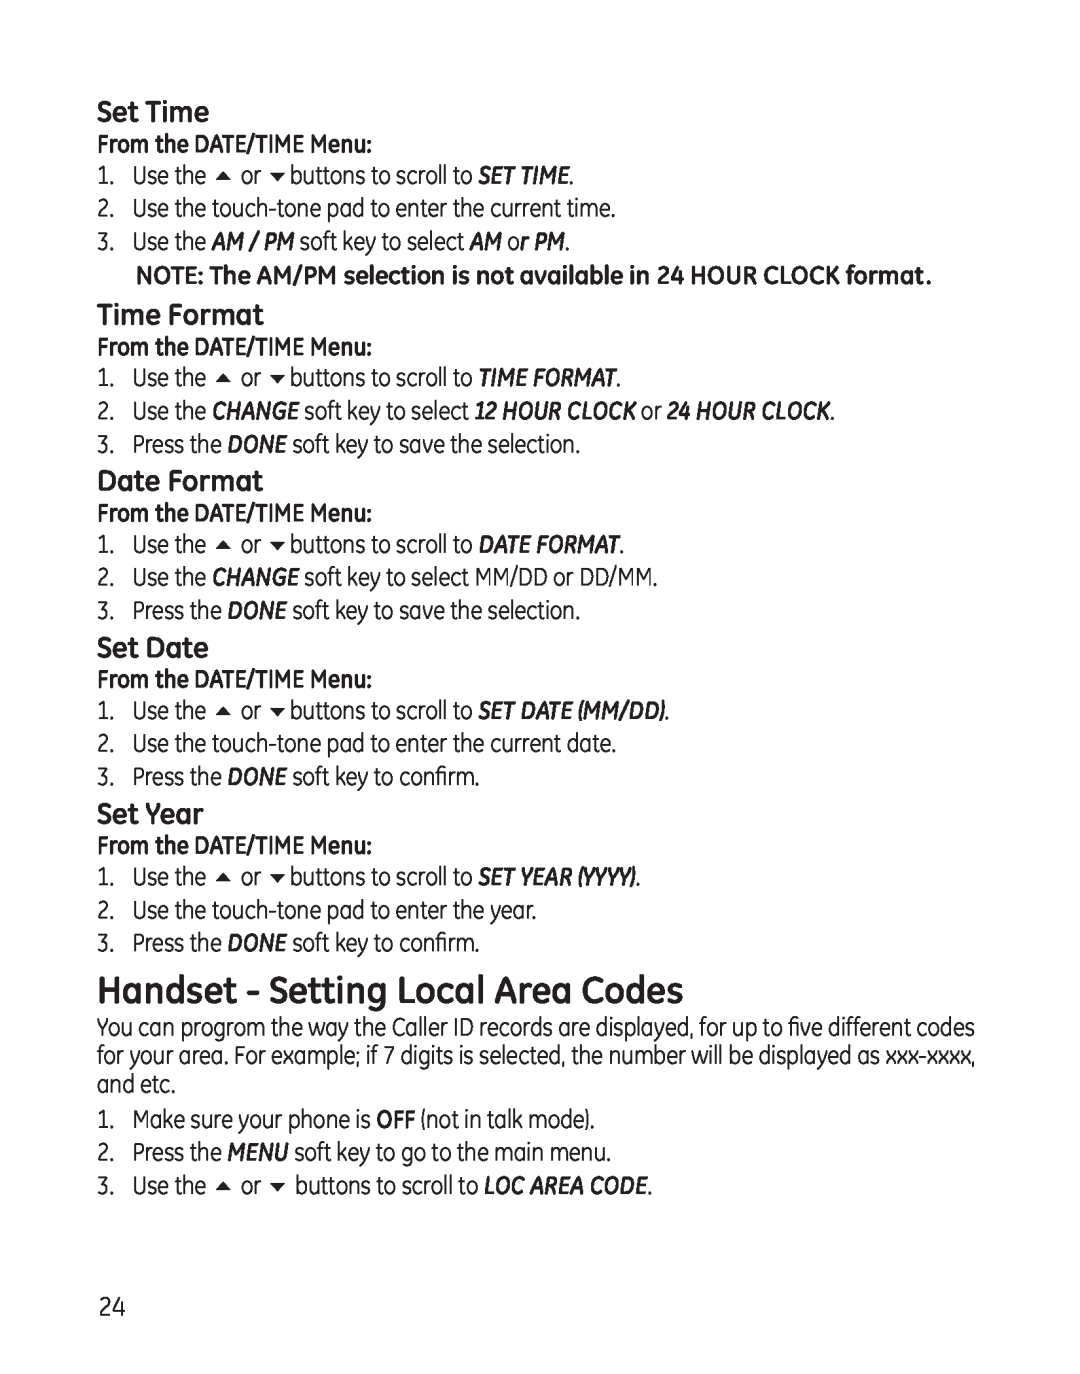 GE 25865 manual Handset - Setting Local Area Codes, Set Time, Time Format, Date Format, Set Date, Set Year 